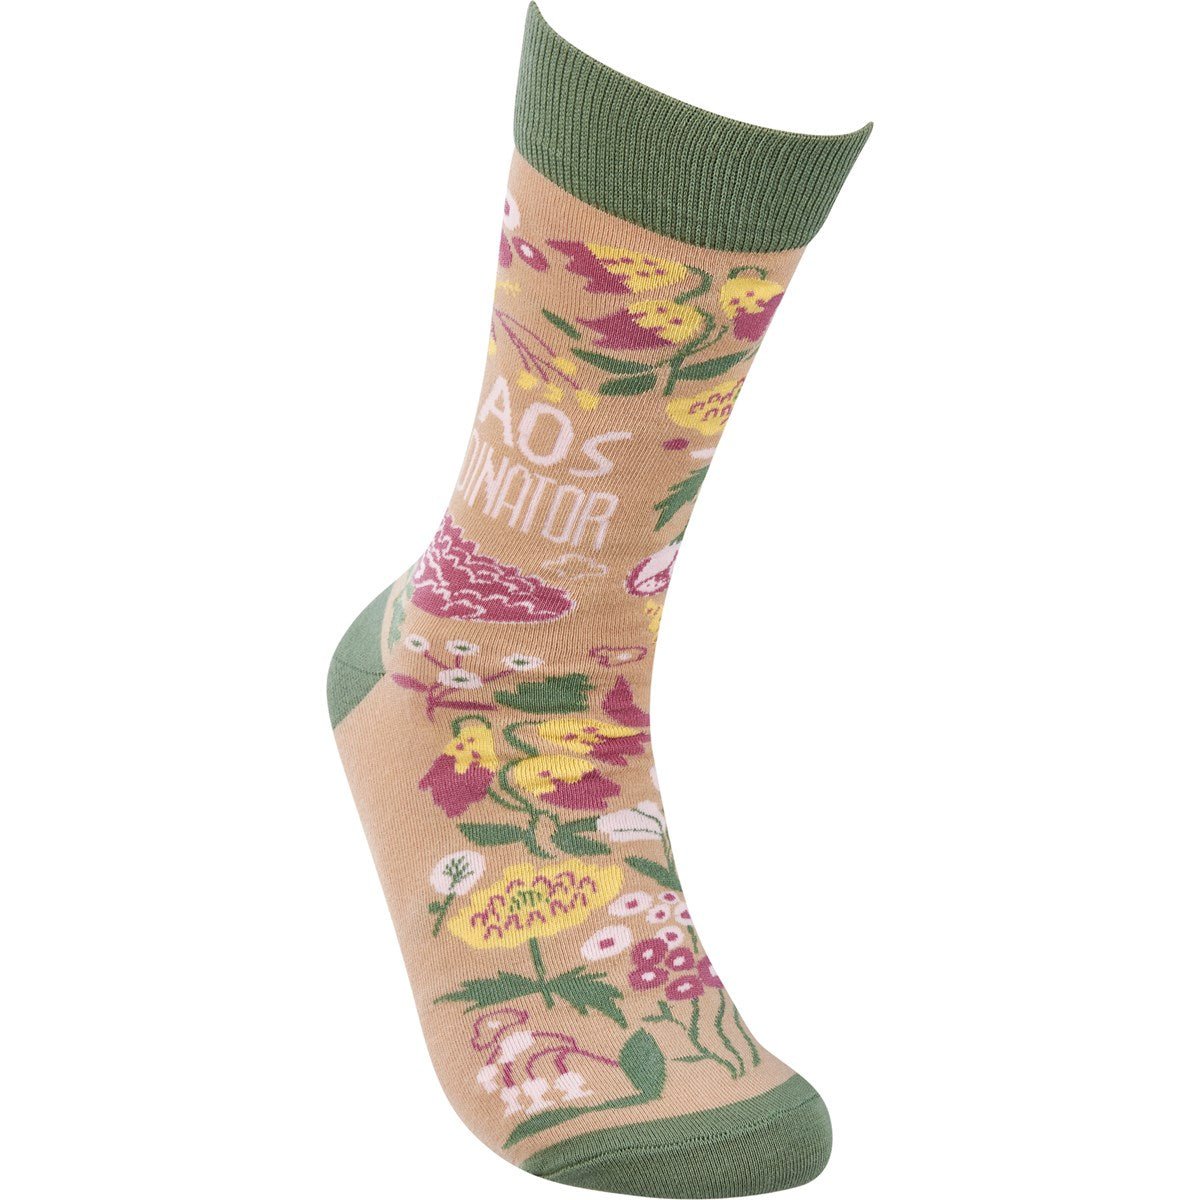 Chaos Coordinator Funny Socks in Green and Floral